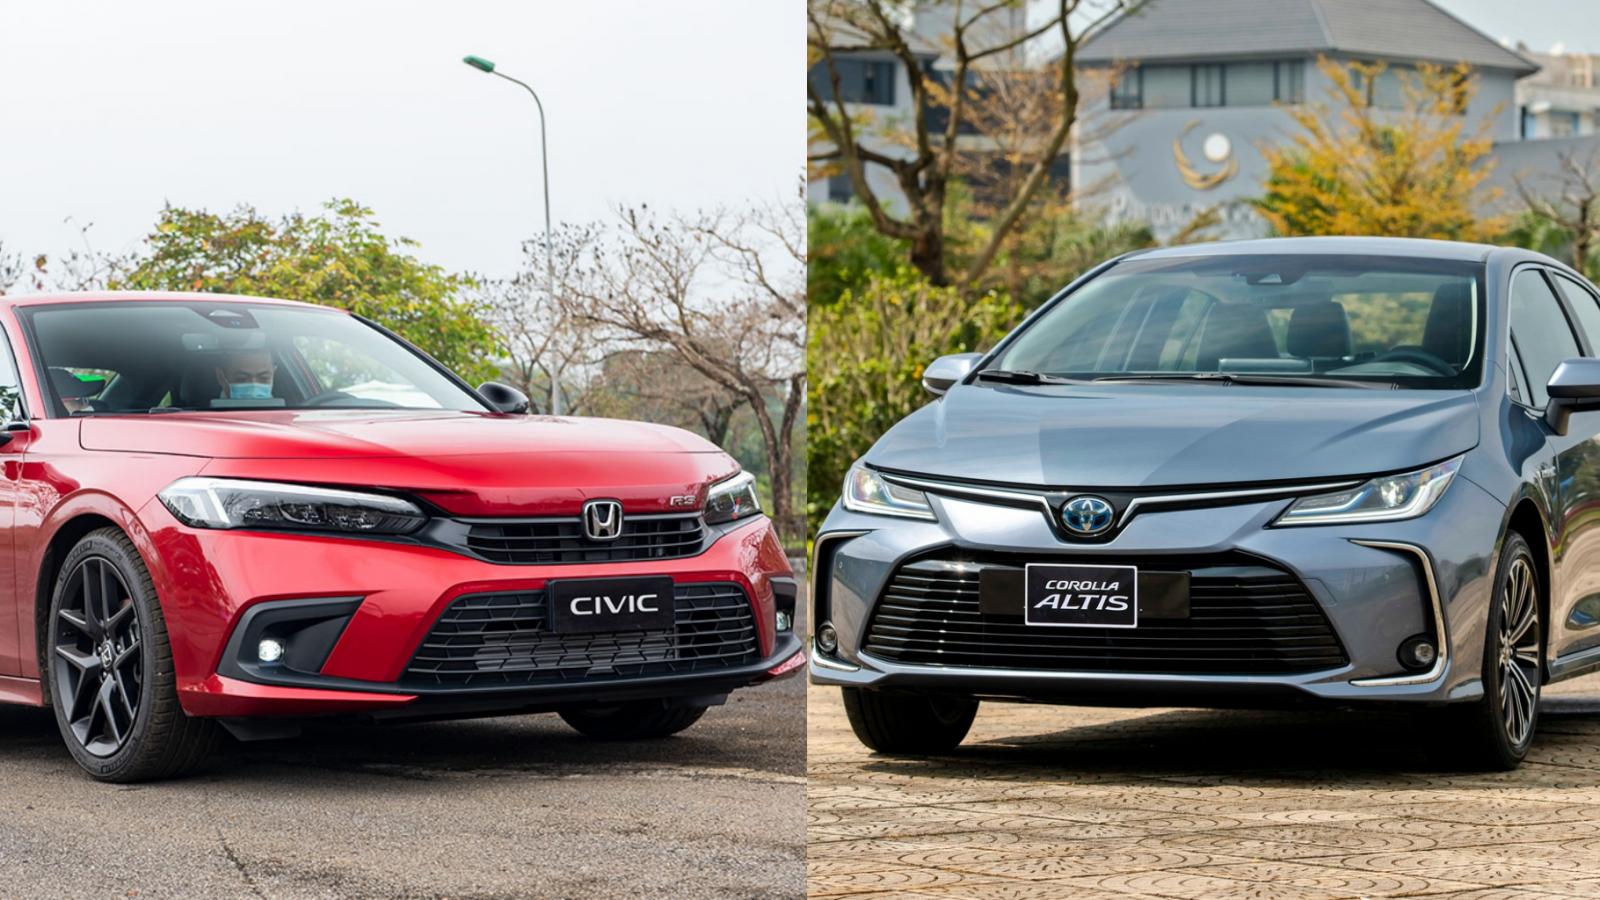 Toyota Corolla Altis Vs Honda Civic: Which One Is Better?